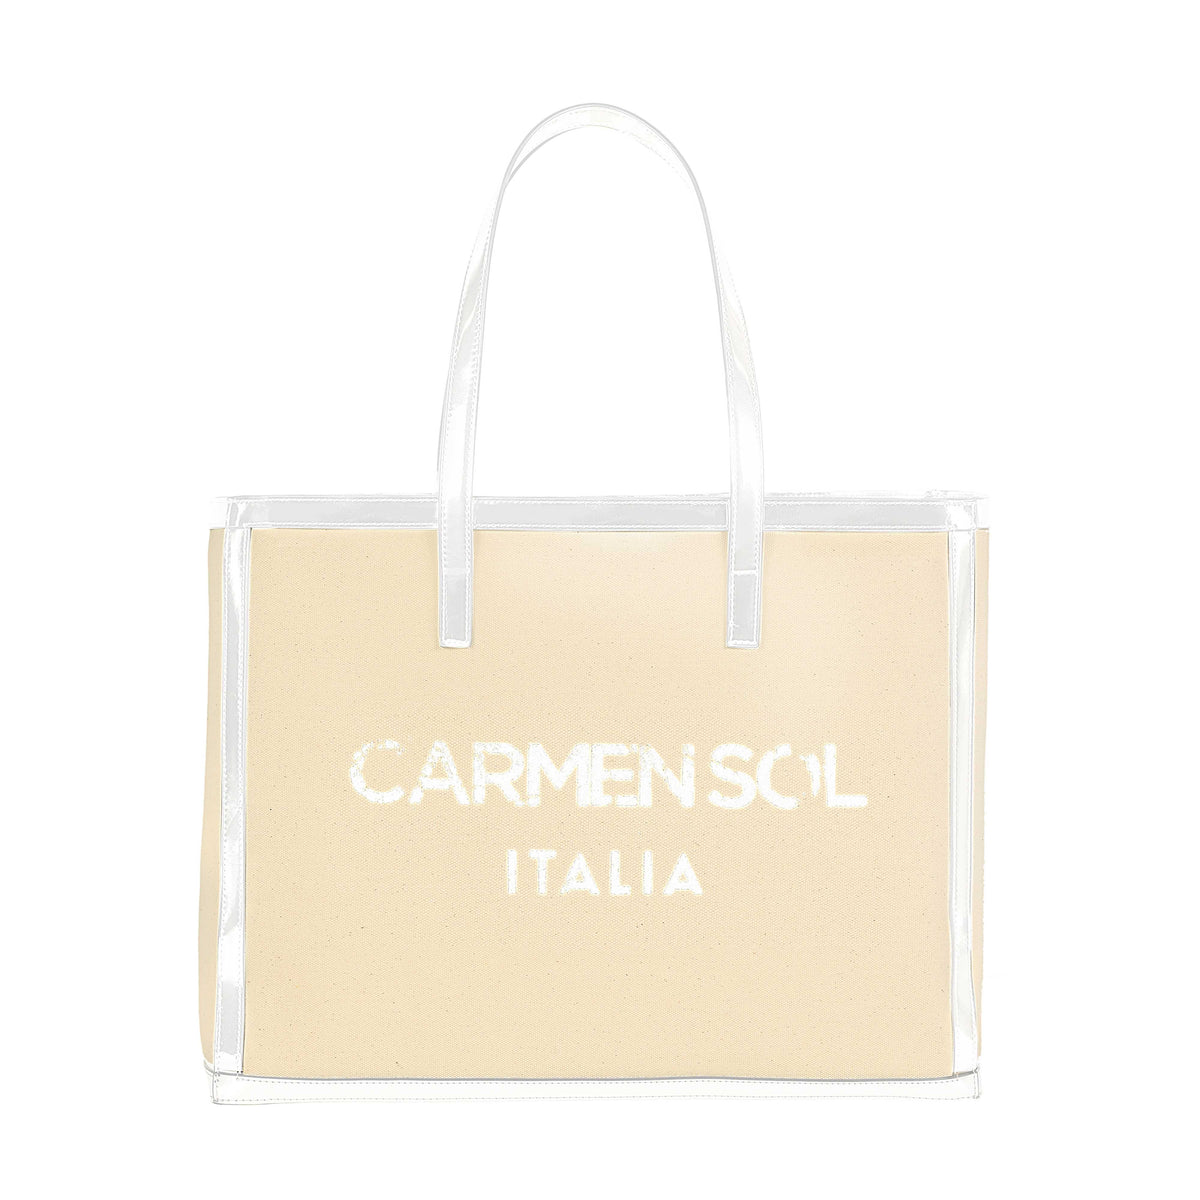 Buy Roma Canvas Tote bags, Large Totes for women, Jelly bag